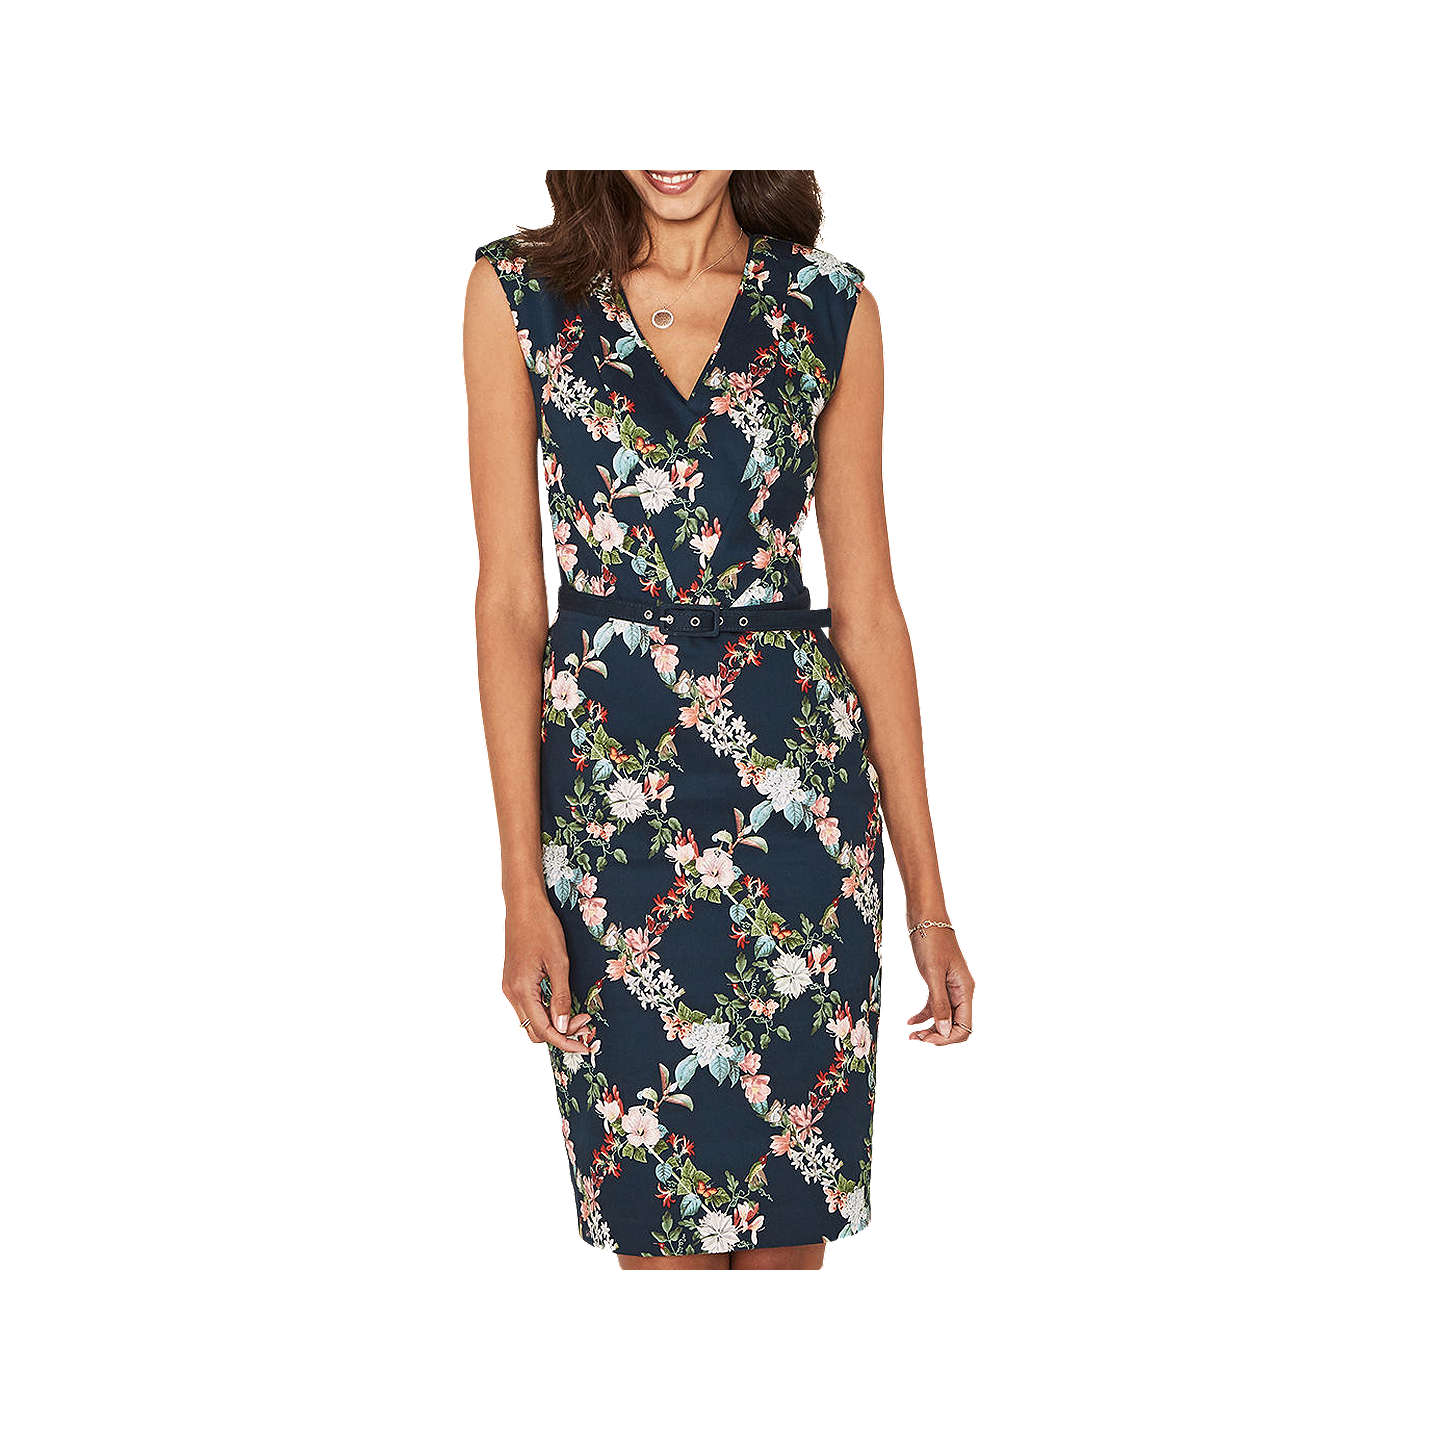 Oasis Fitzwilliam Floral Pencil Dress, Turquoise at John Lewis